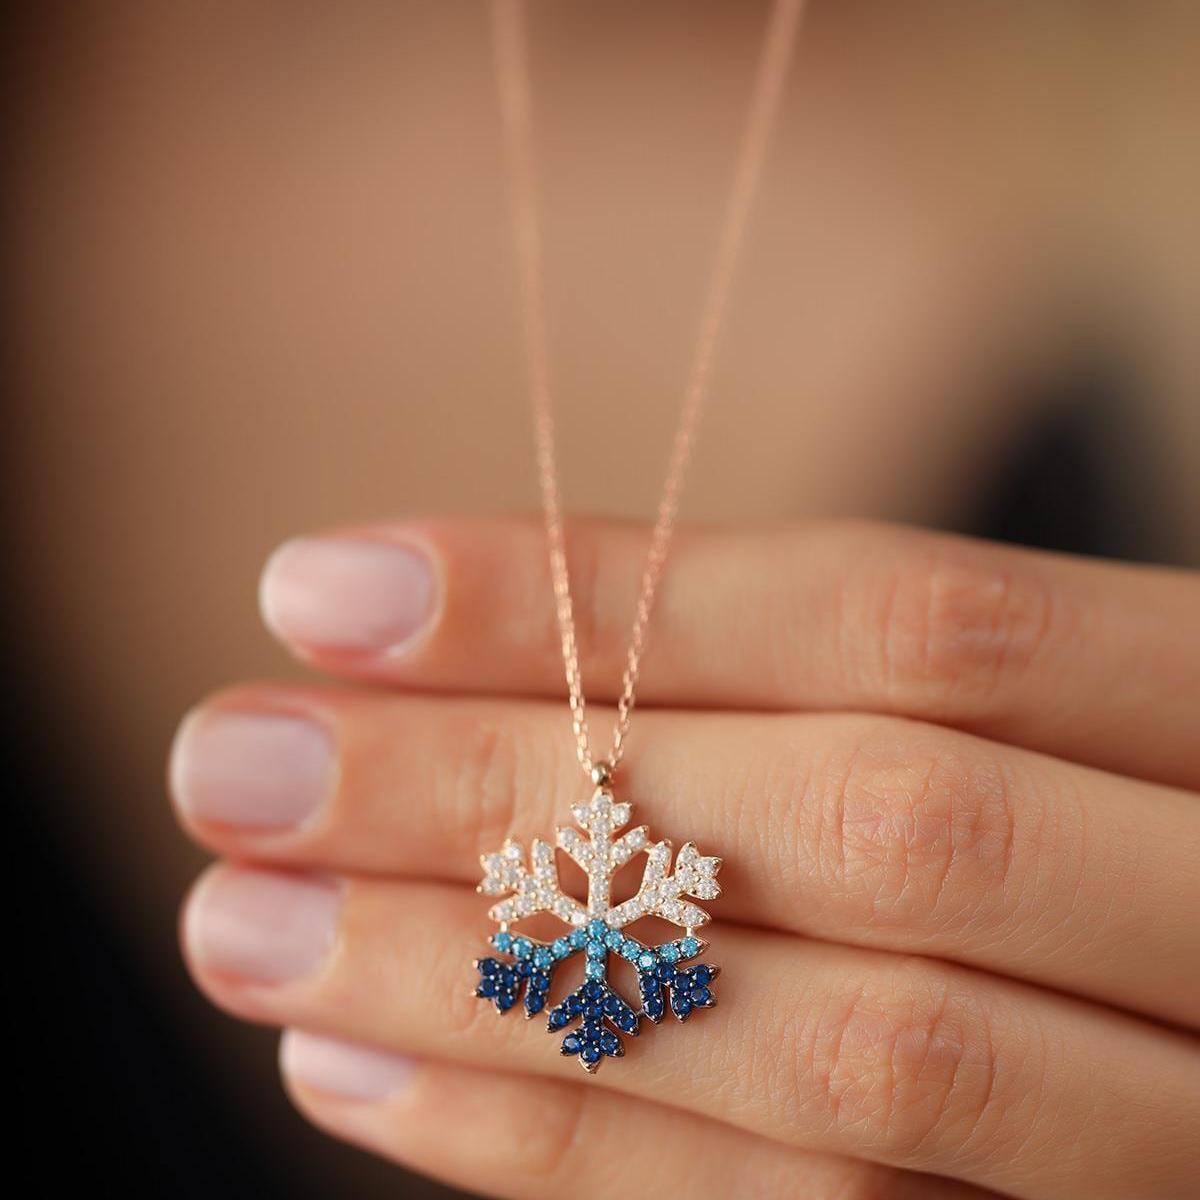 Snowflake Diamond Necklace • Best Christmas Gift For Mom - Trending Silver Gifts